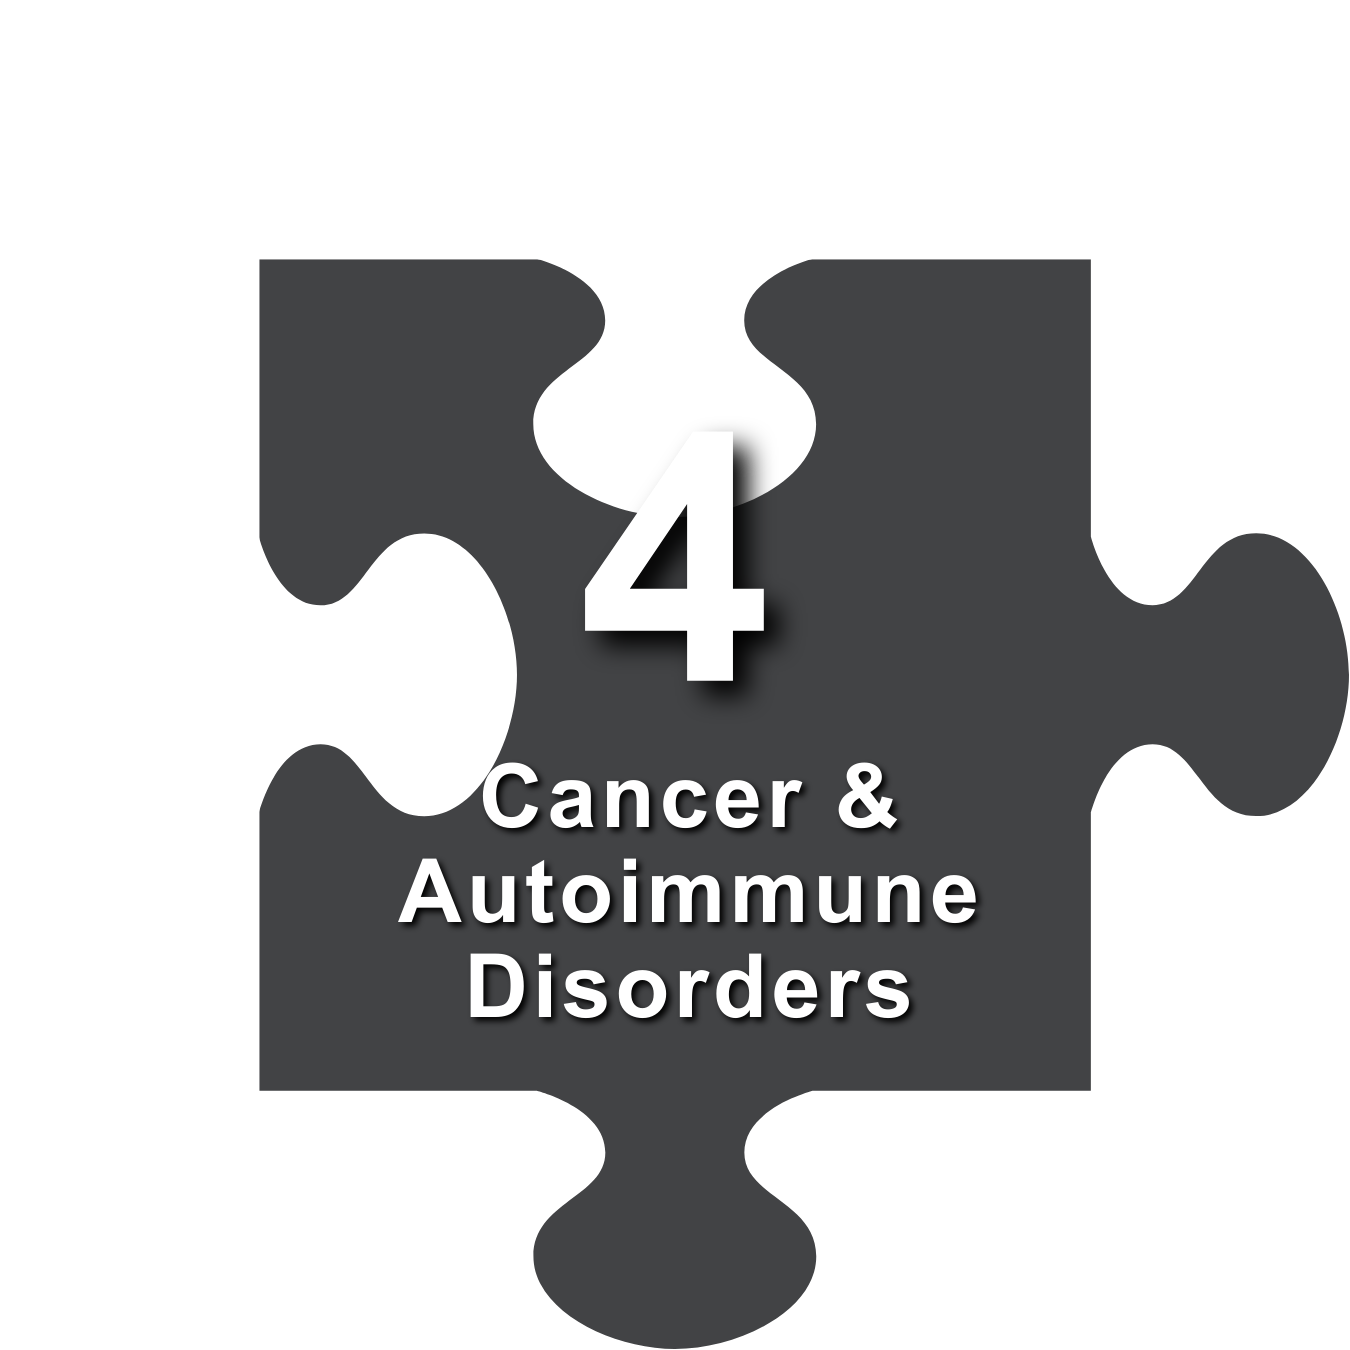 4. Cancer and Autoimmune Disorders